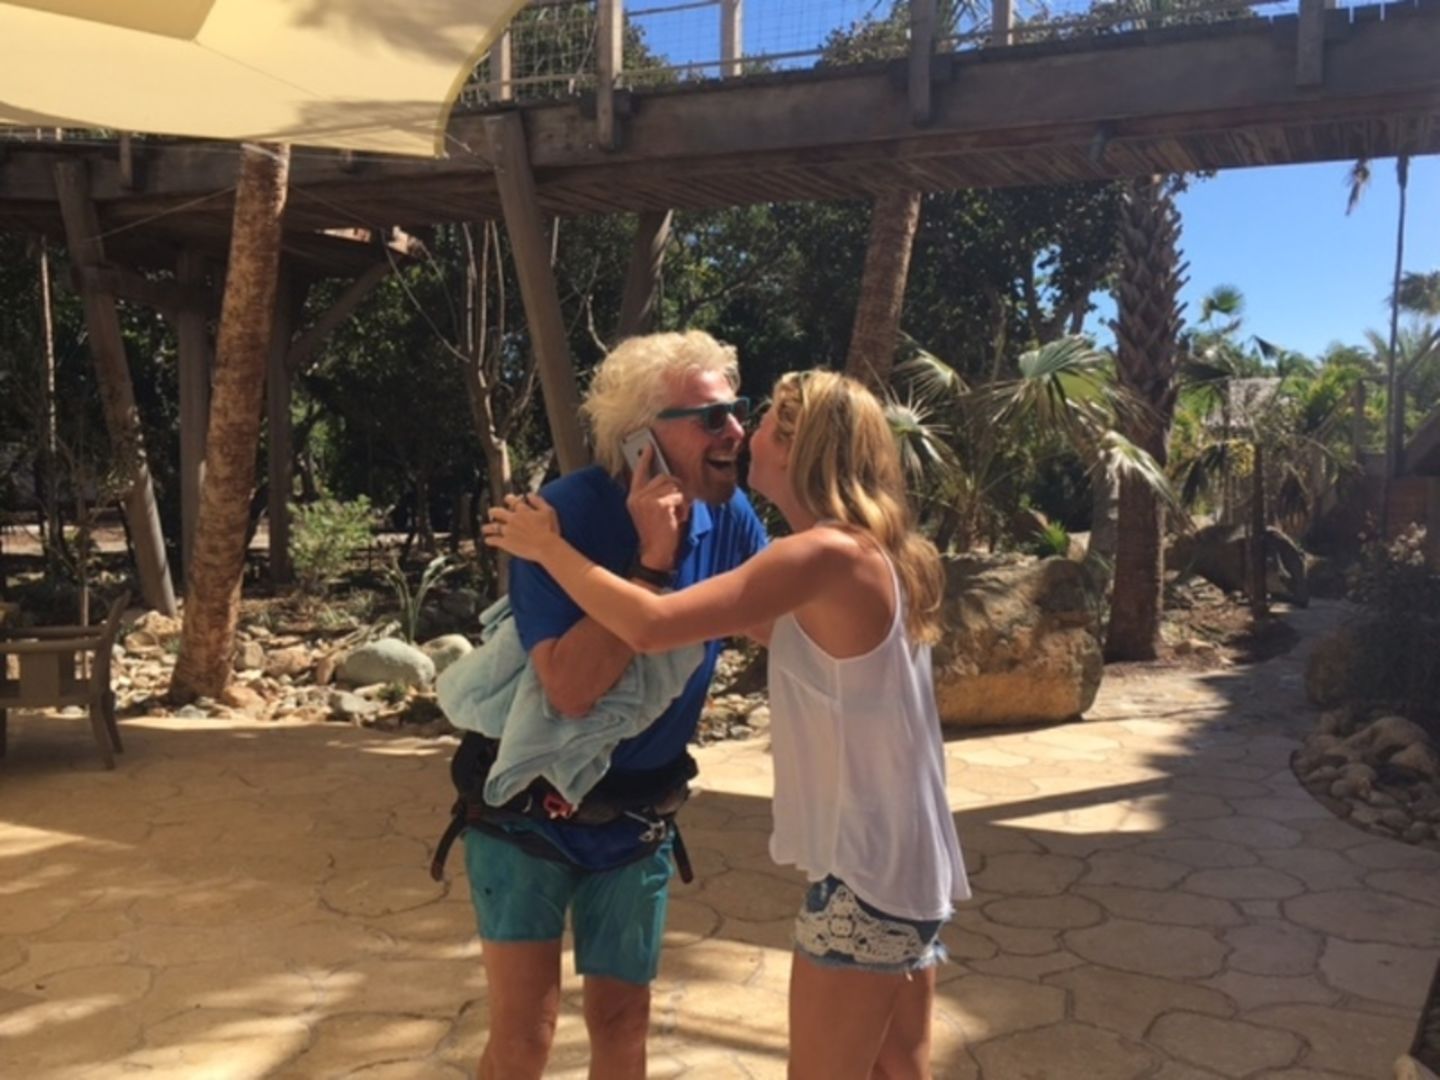 Richard Branson and Holly Branson hug, while Richard is on the phone